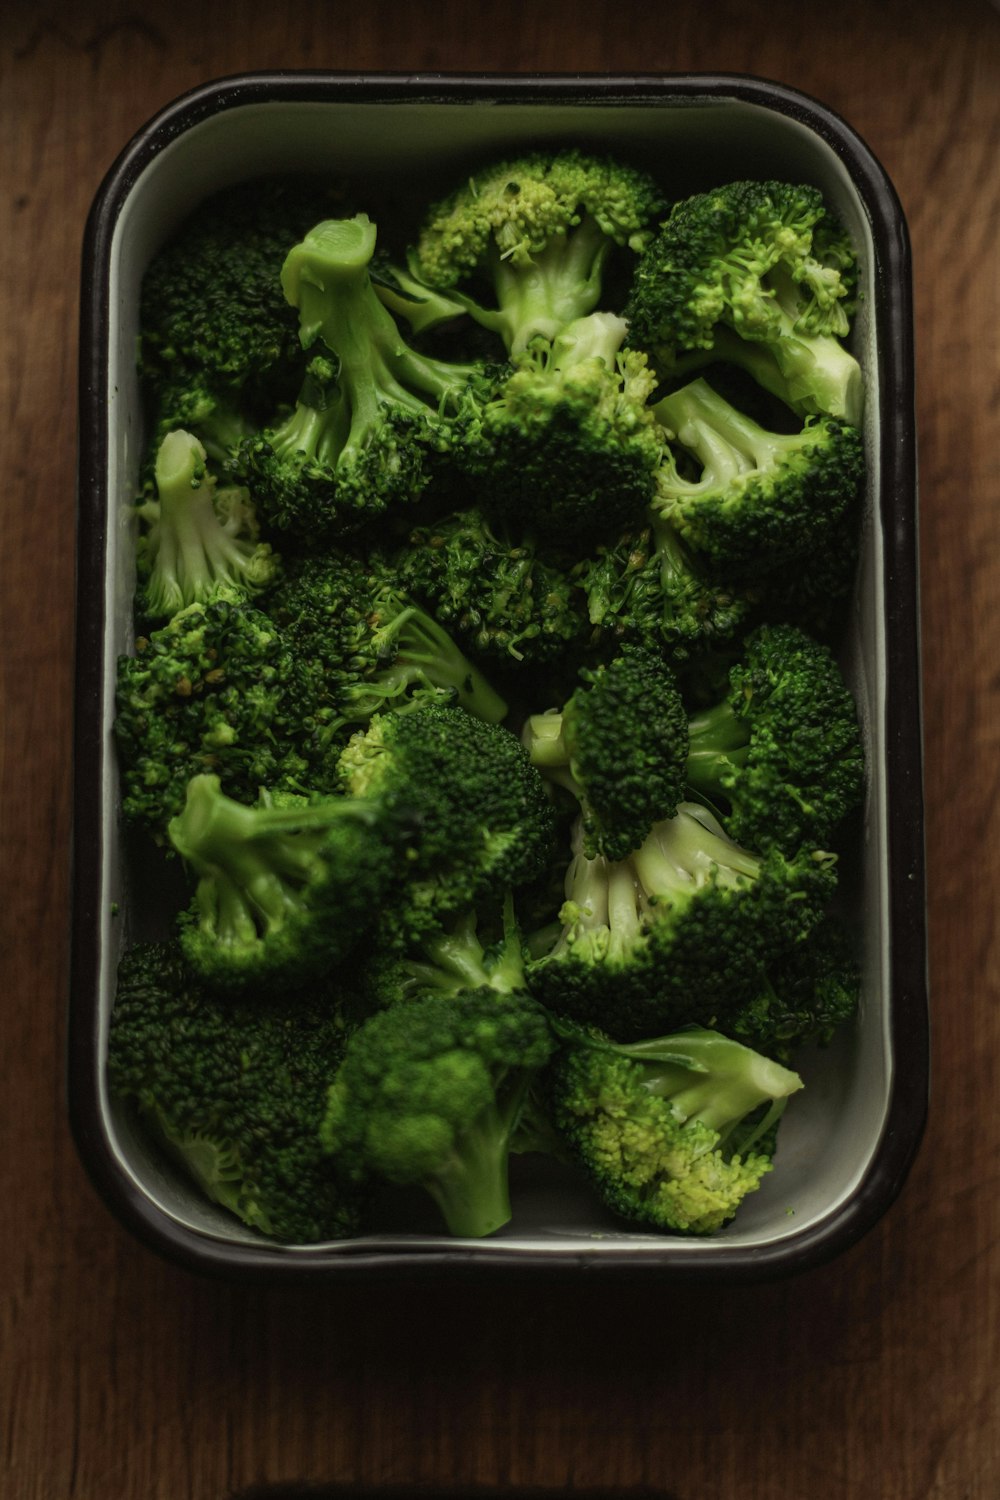 a dish of broccoli on a wooden table